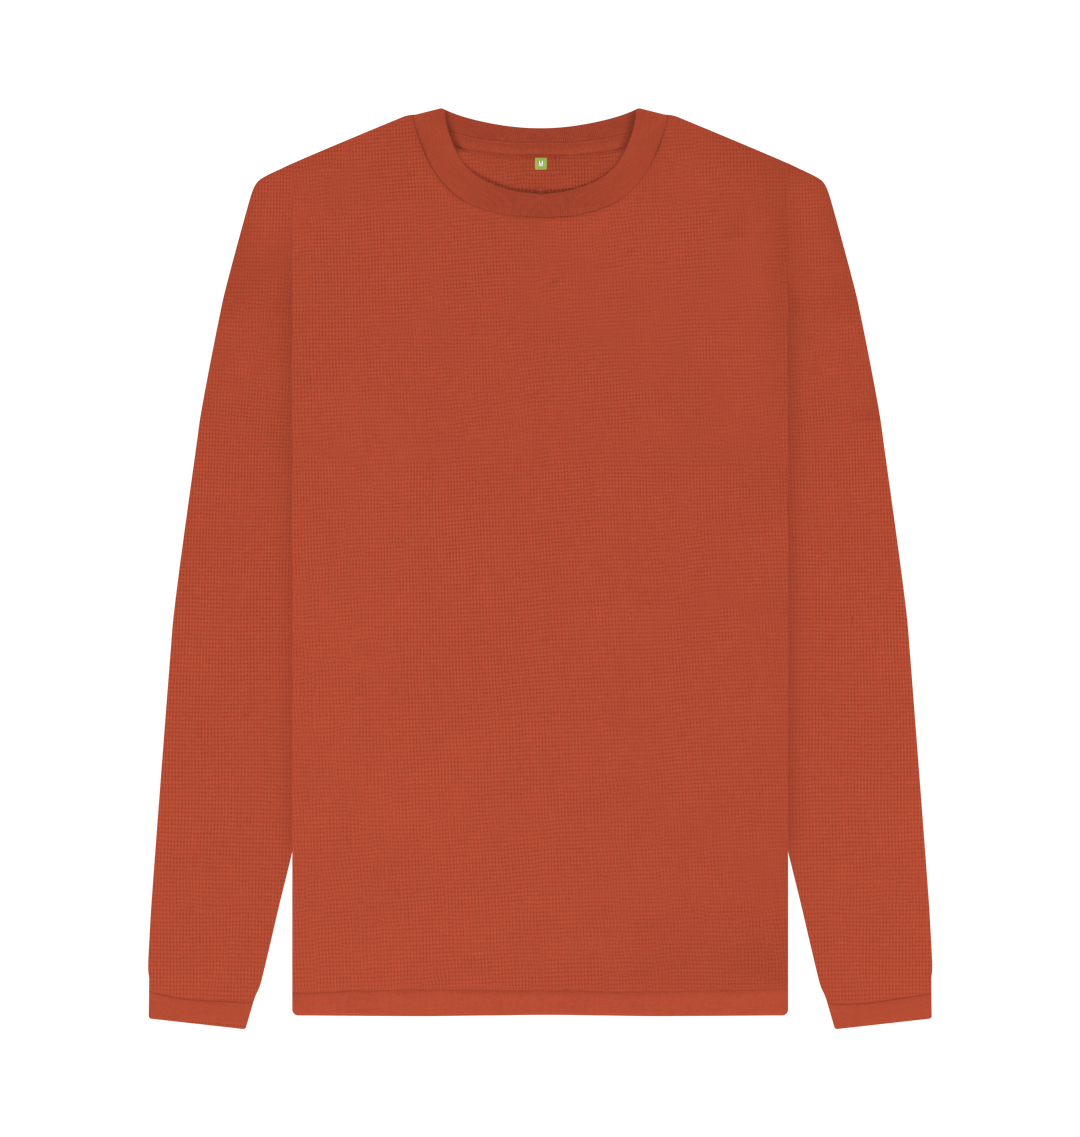 Kenco Outfitters  Filson Men's Waffle Knit Thermal Crew